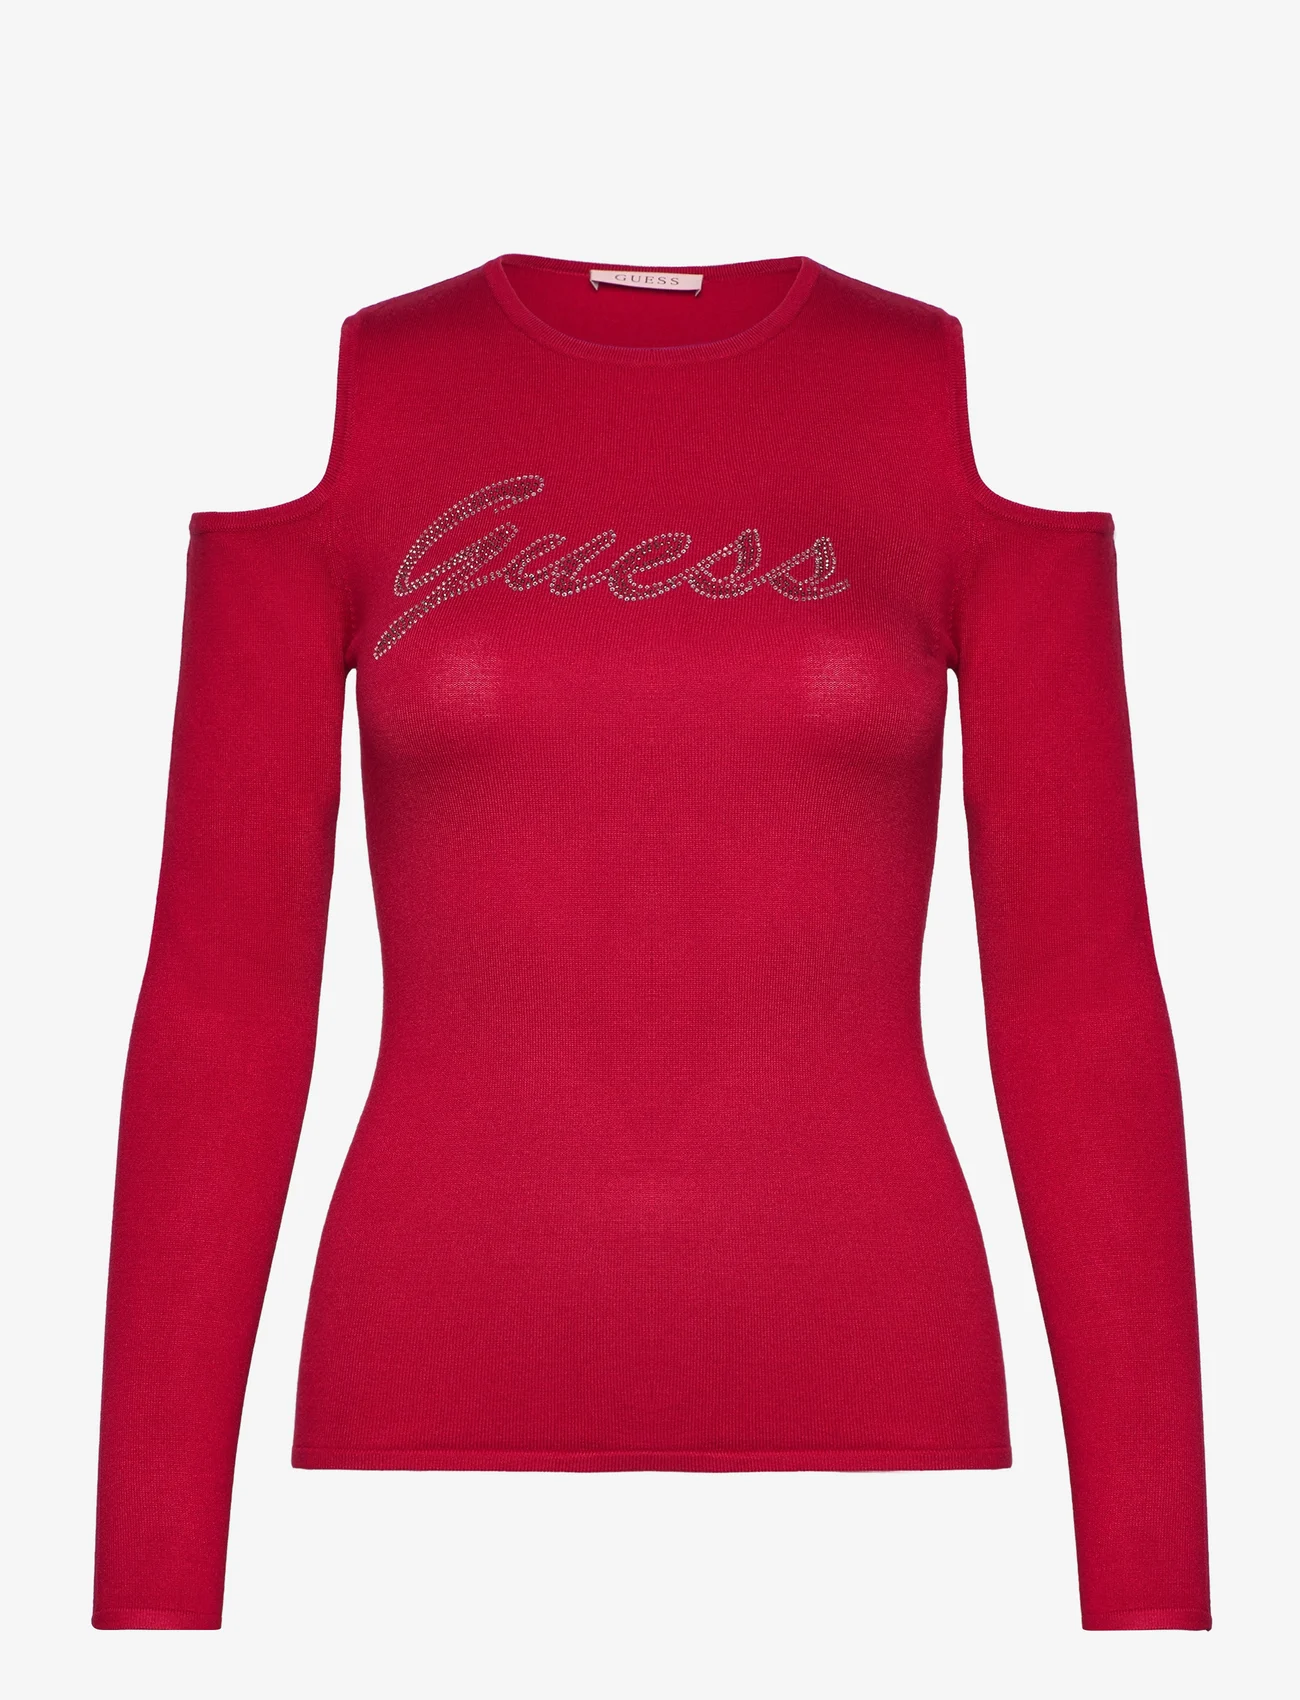 GUESS Jeans - LS COLD SHLDR GUESS LOGO SWTR - langærmede toppe - chili red - 0